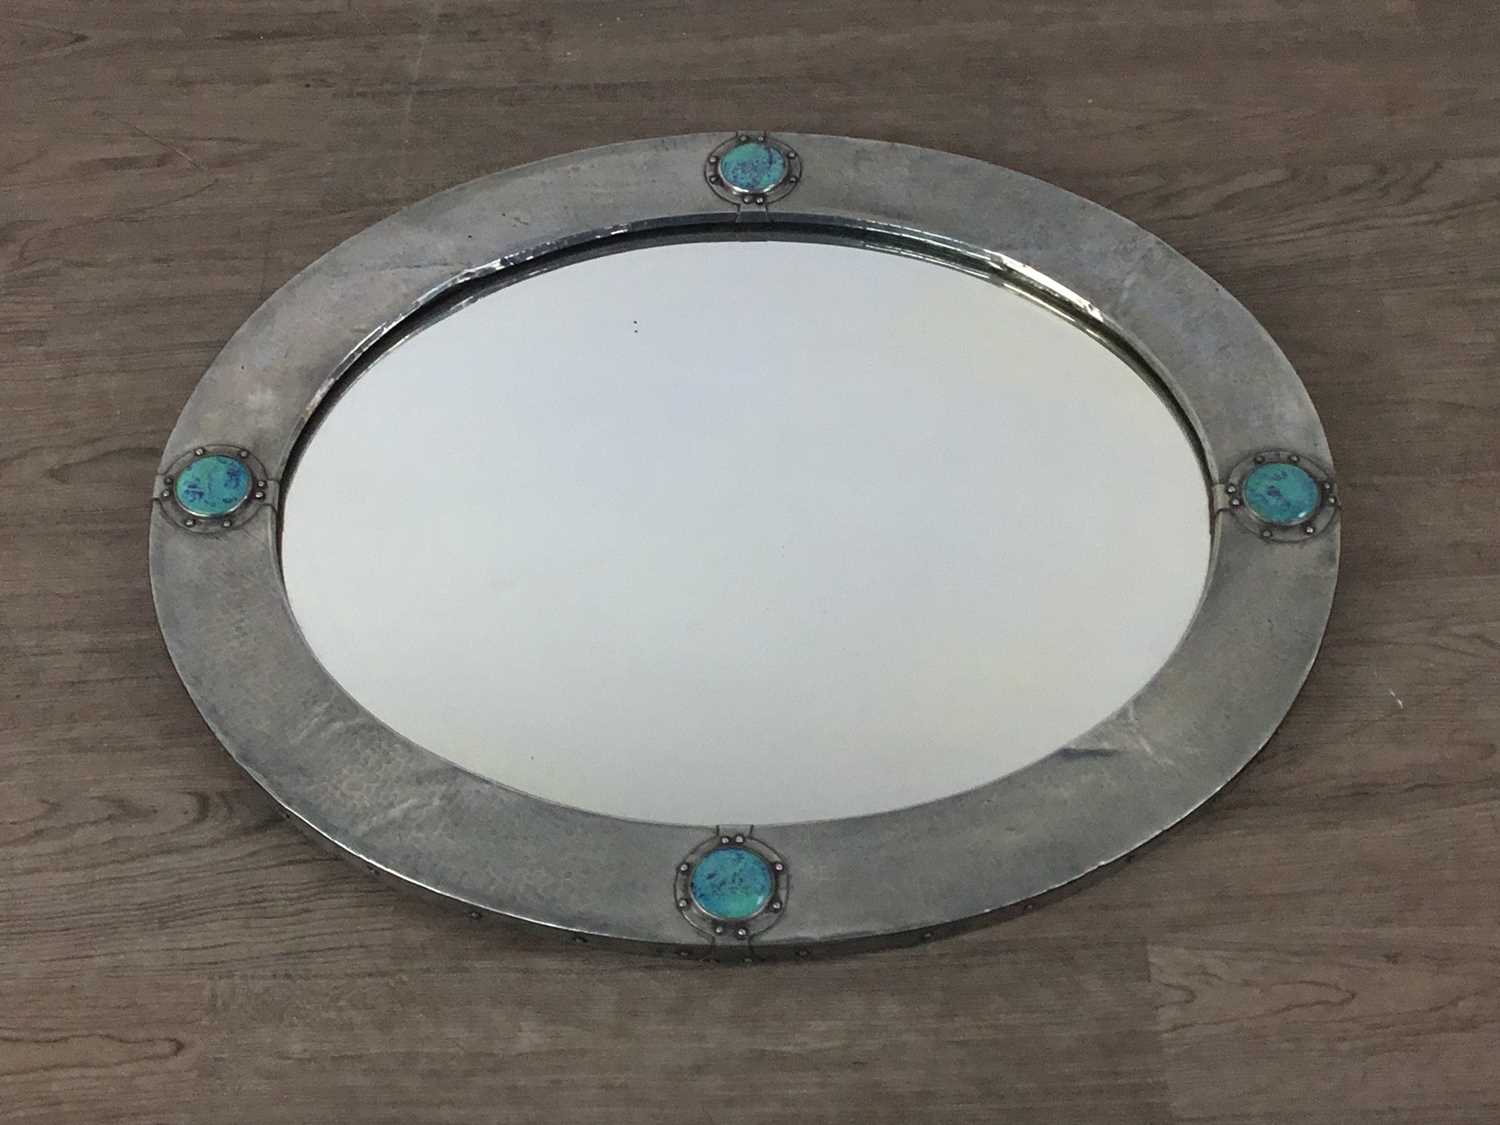 Lot 31 - LIBERTY & CO, ARTS & CRAFTS PEWTER WALL MIRROR